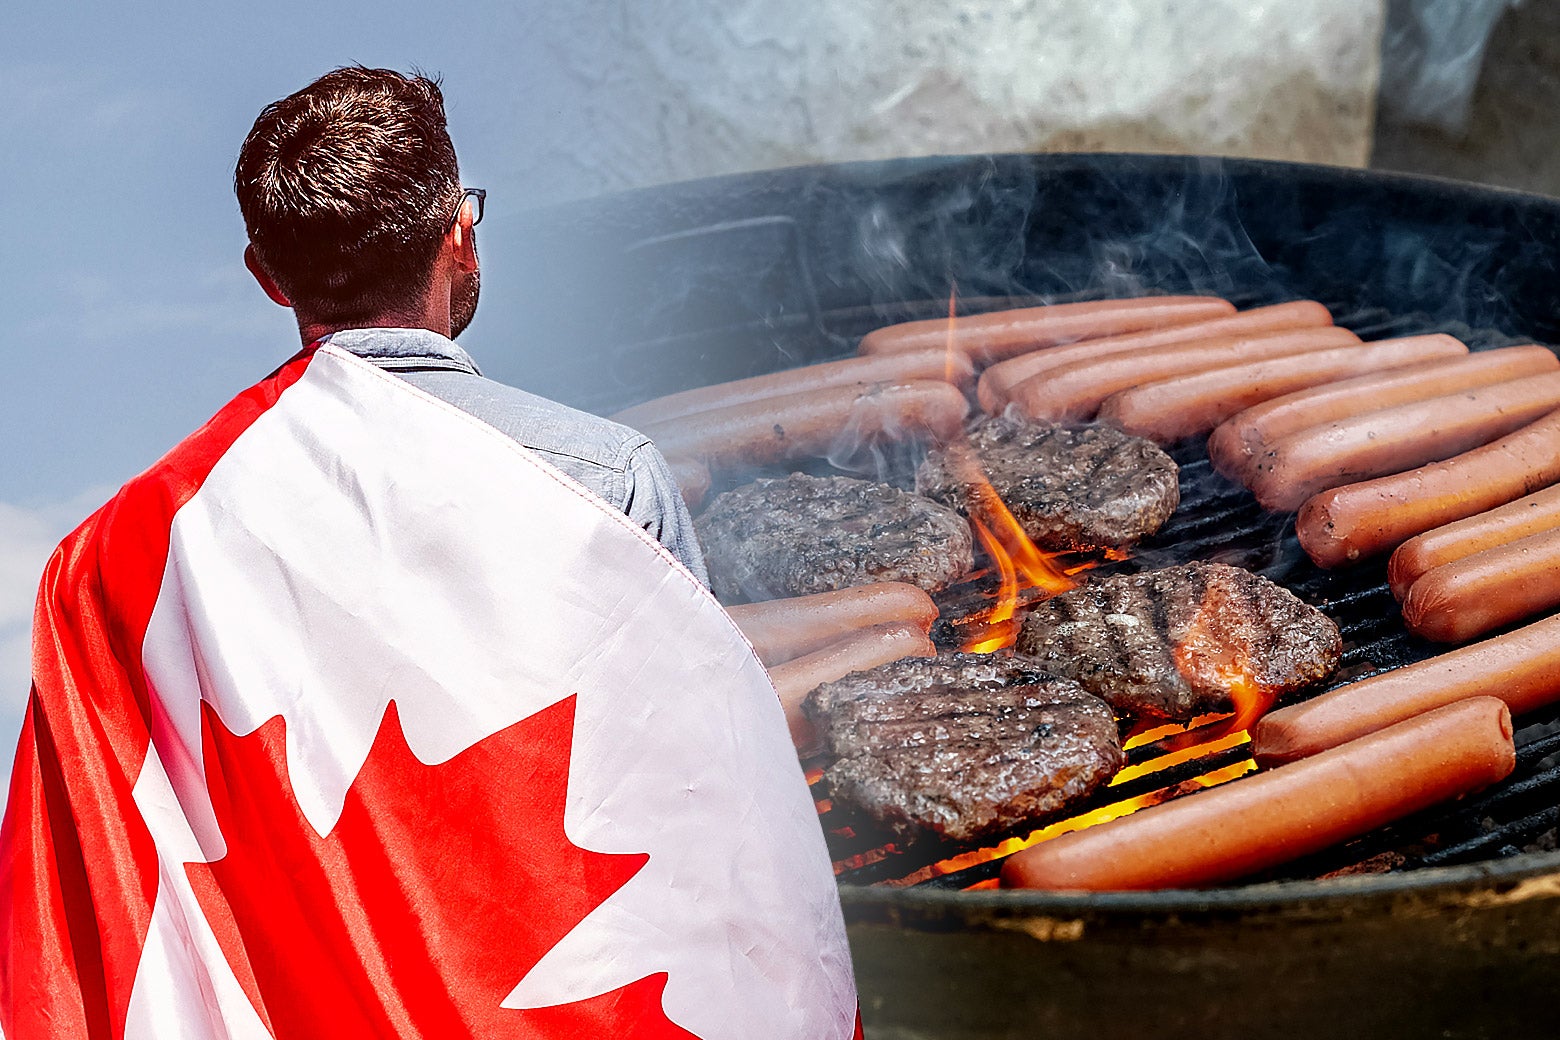 A man with a Canadian flag draped over his back, next to a grill cooking hot dogs and hamburgers.